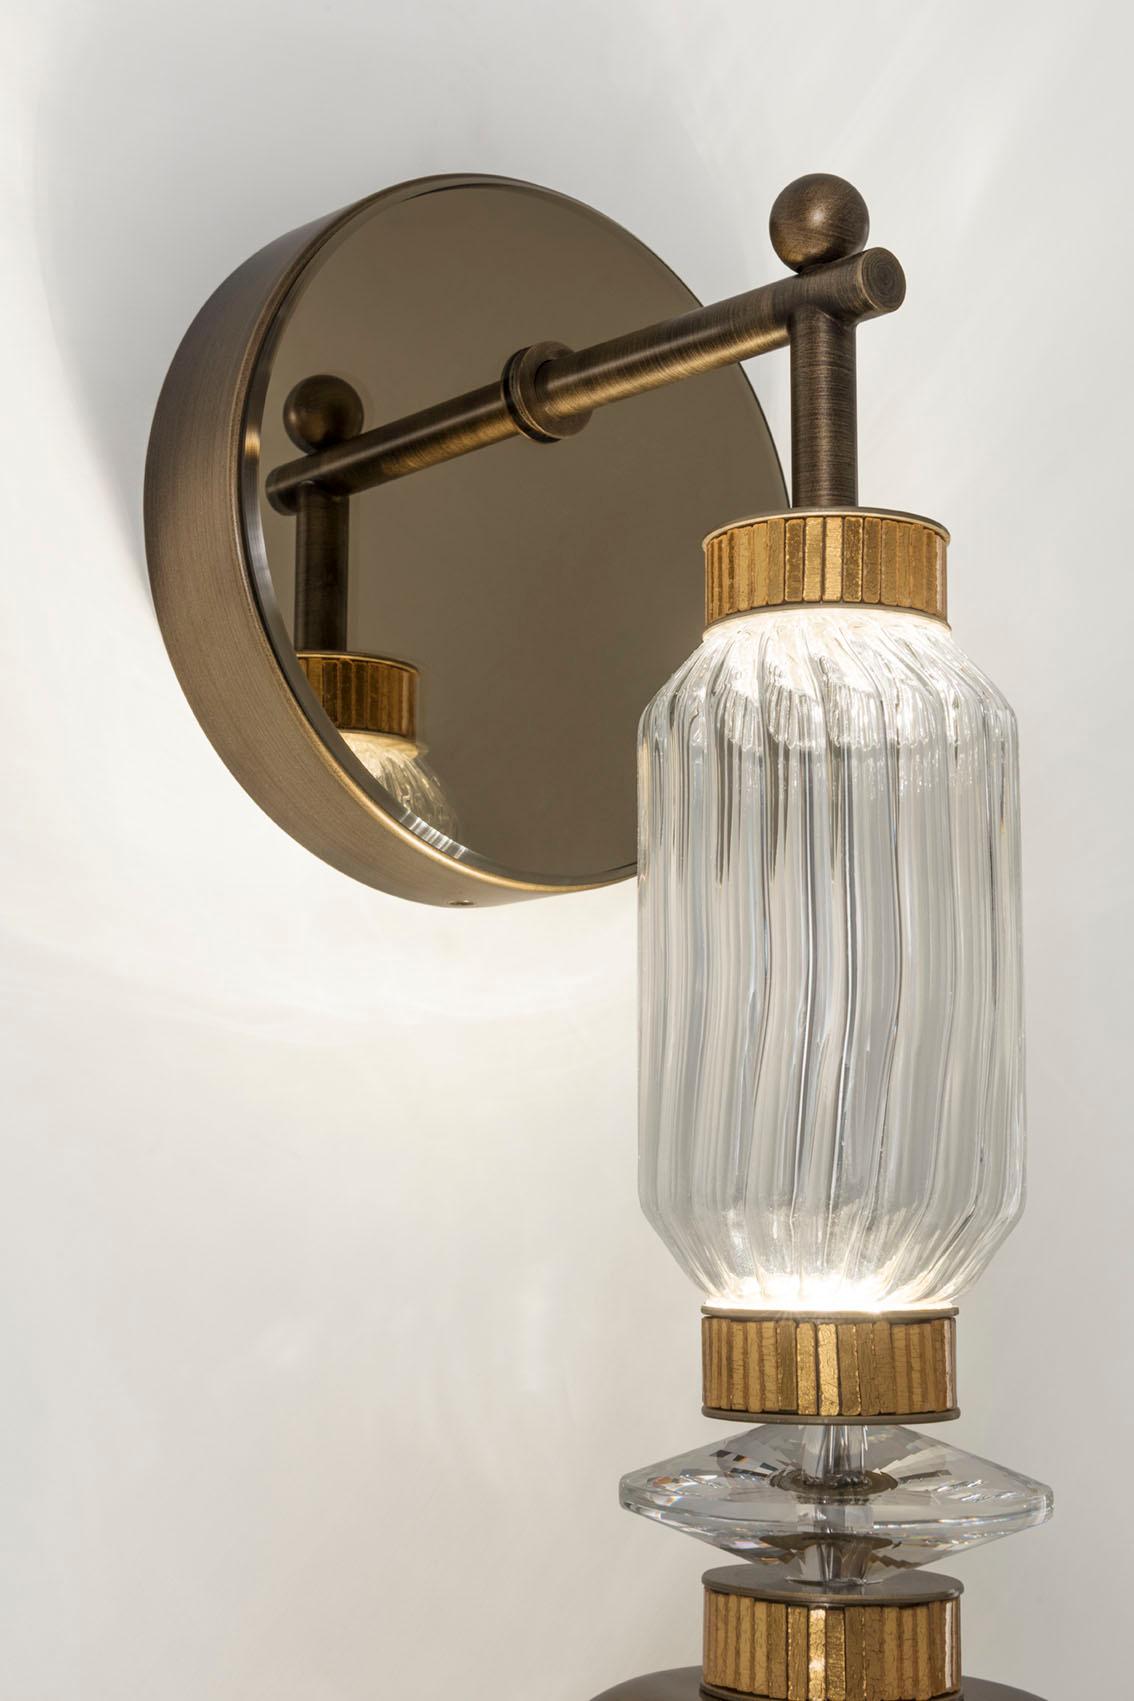 Italian Wall Sconce Realised with Pyrex Glass in Amber or Smoked Finish Mosaic Insert For Sale